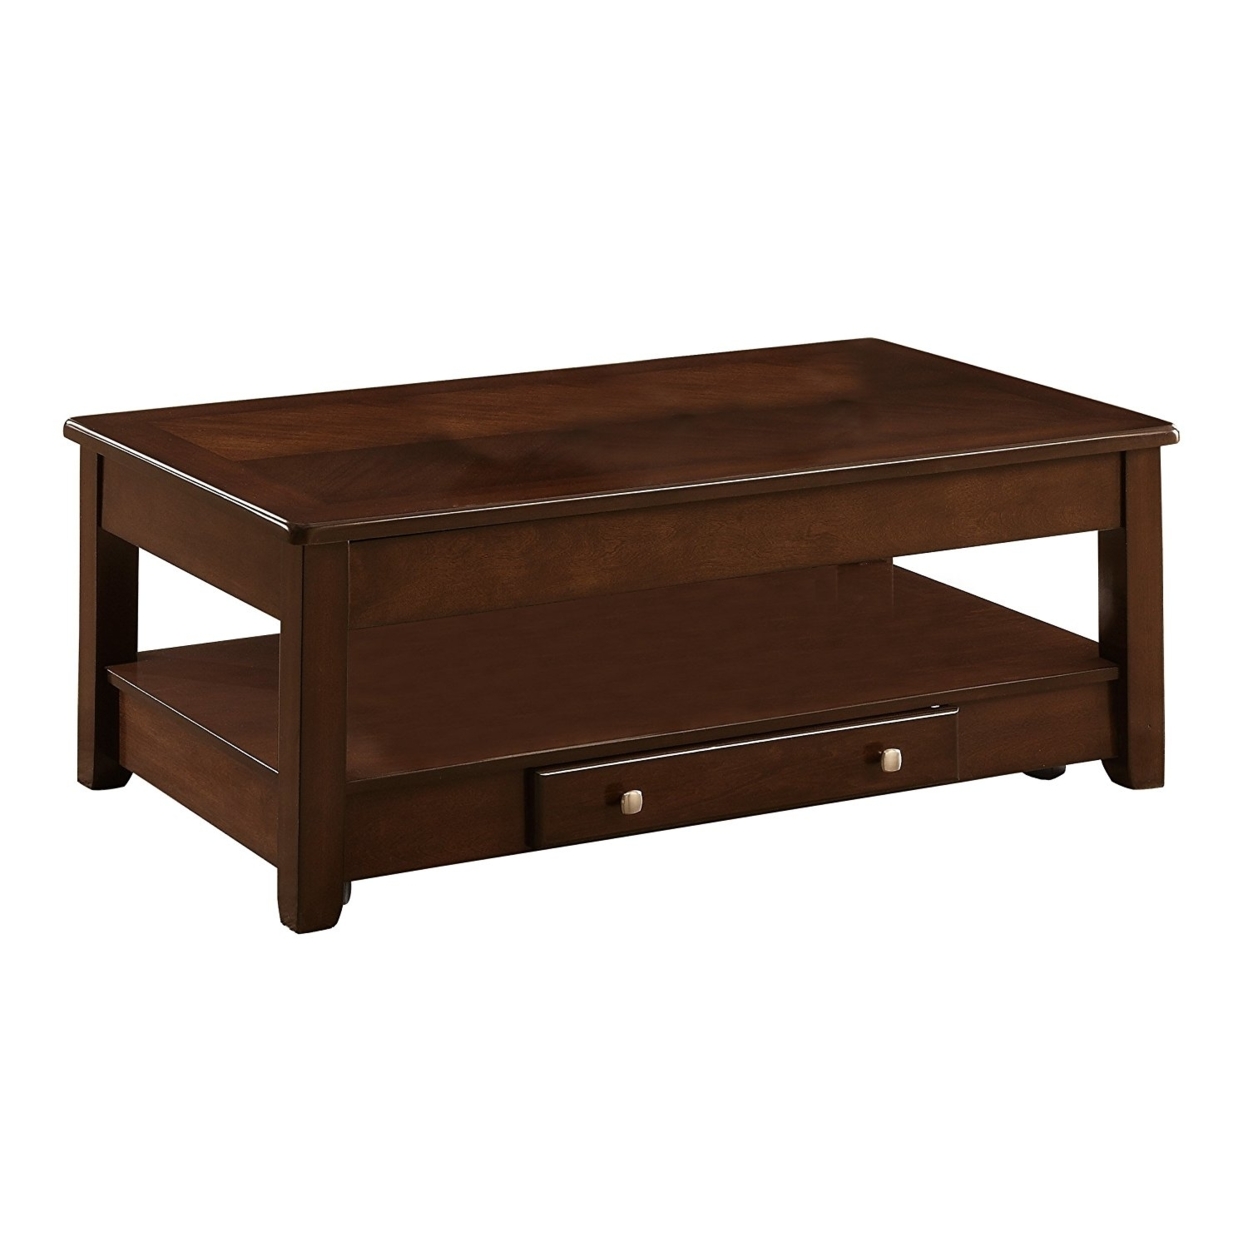 Wooden Cocktail Table With Bottom Shelf And Drawer, Cherry Brown- Saltoro Sherpi